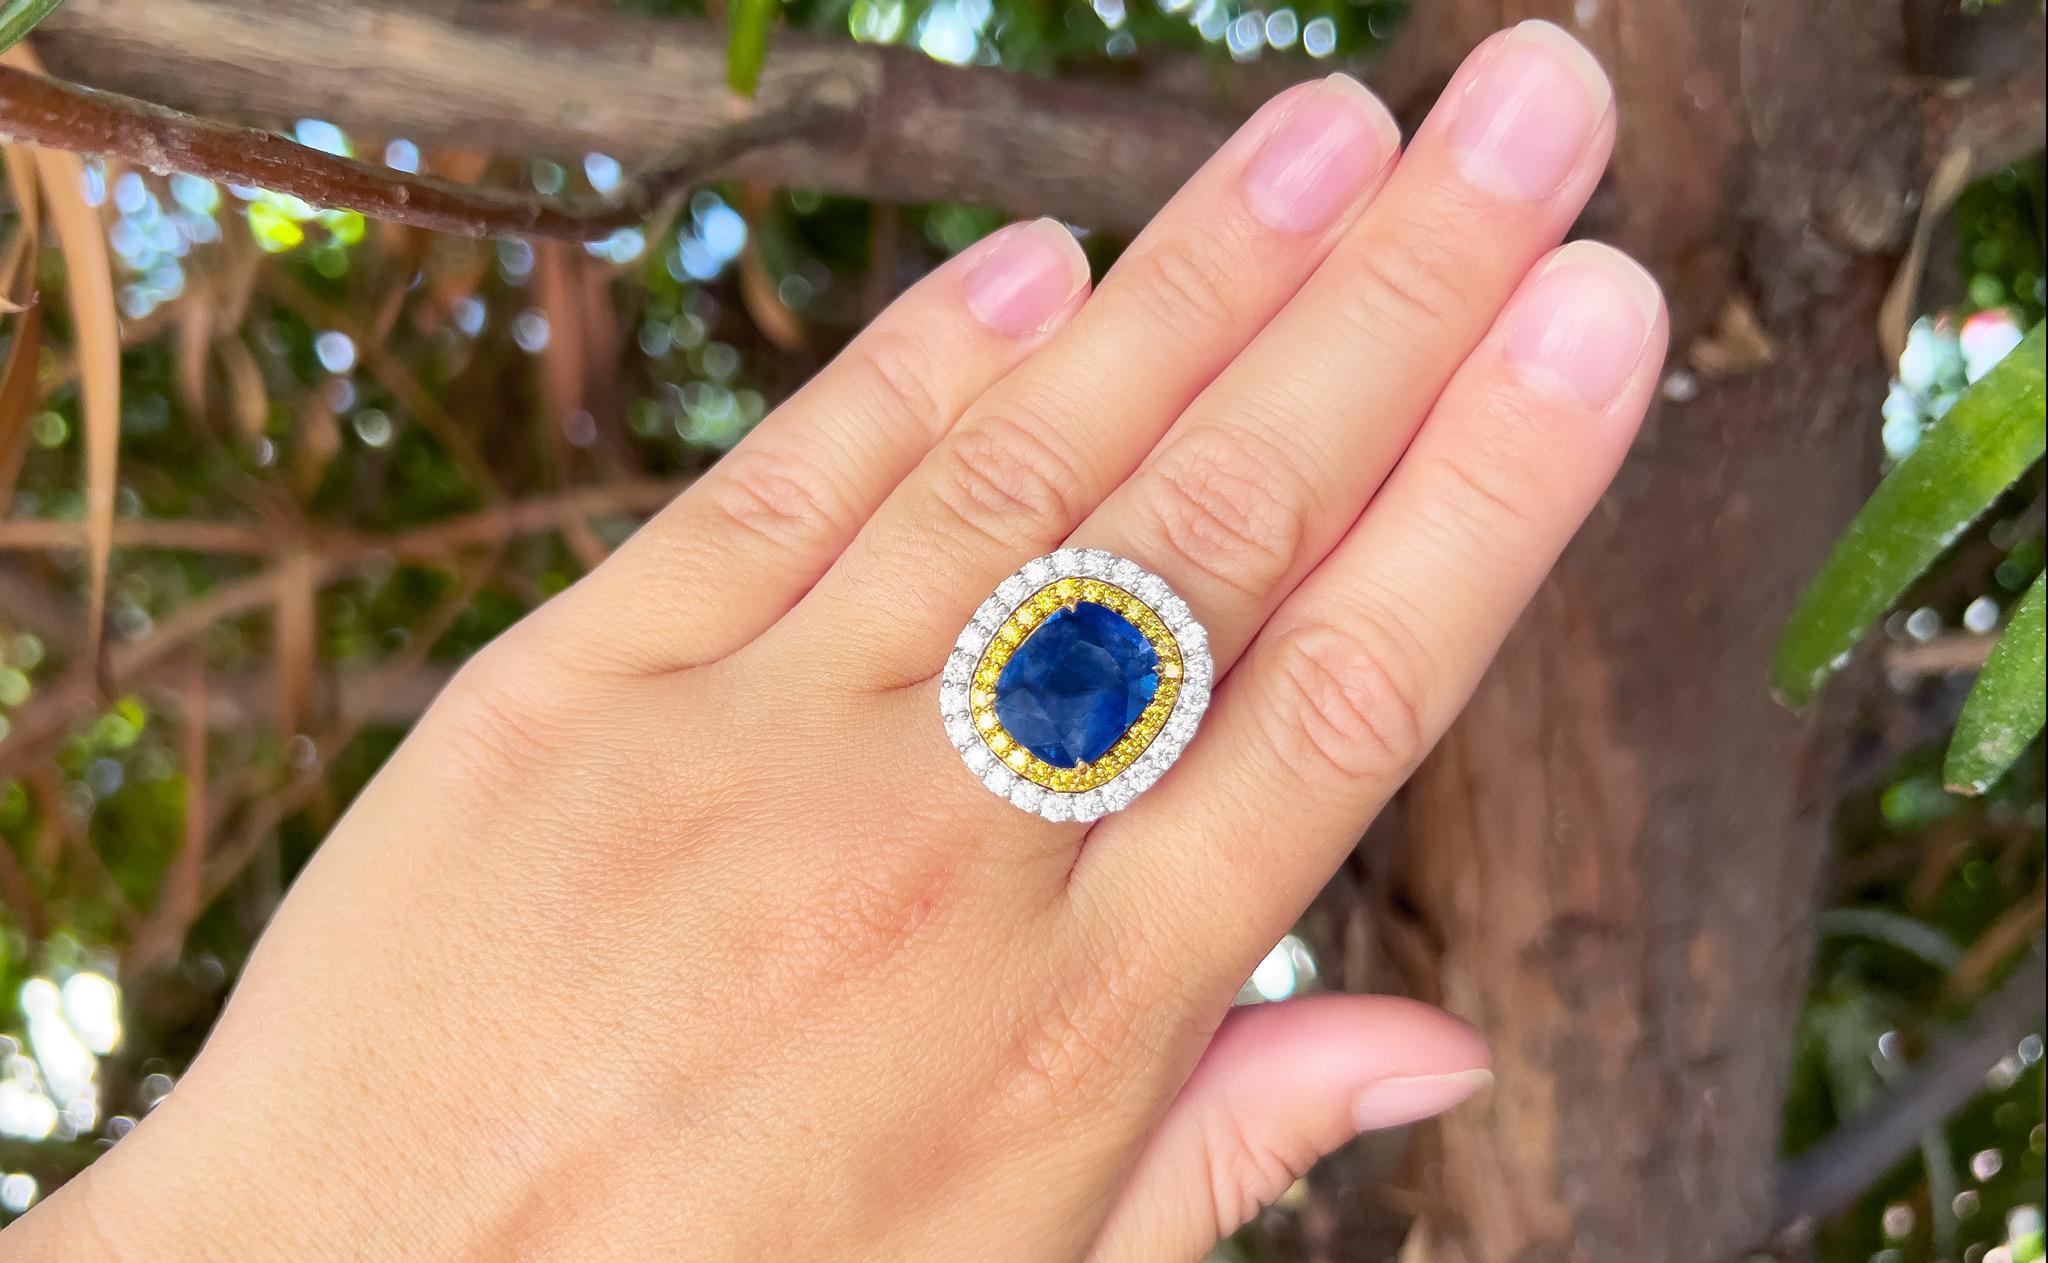 No Heat Sapphire = 18 Carat
Cut: Cushion
Canary Diamonds = 1.10 Carats
White Diamonds = 2.06 Carats
( Color: F, Clarity: VS )
Ring Size: 7.25* US
*It can be resized complimentary